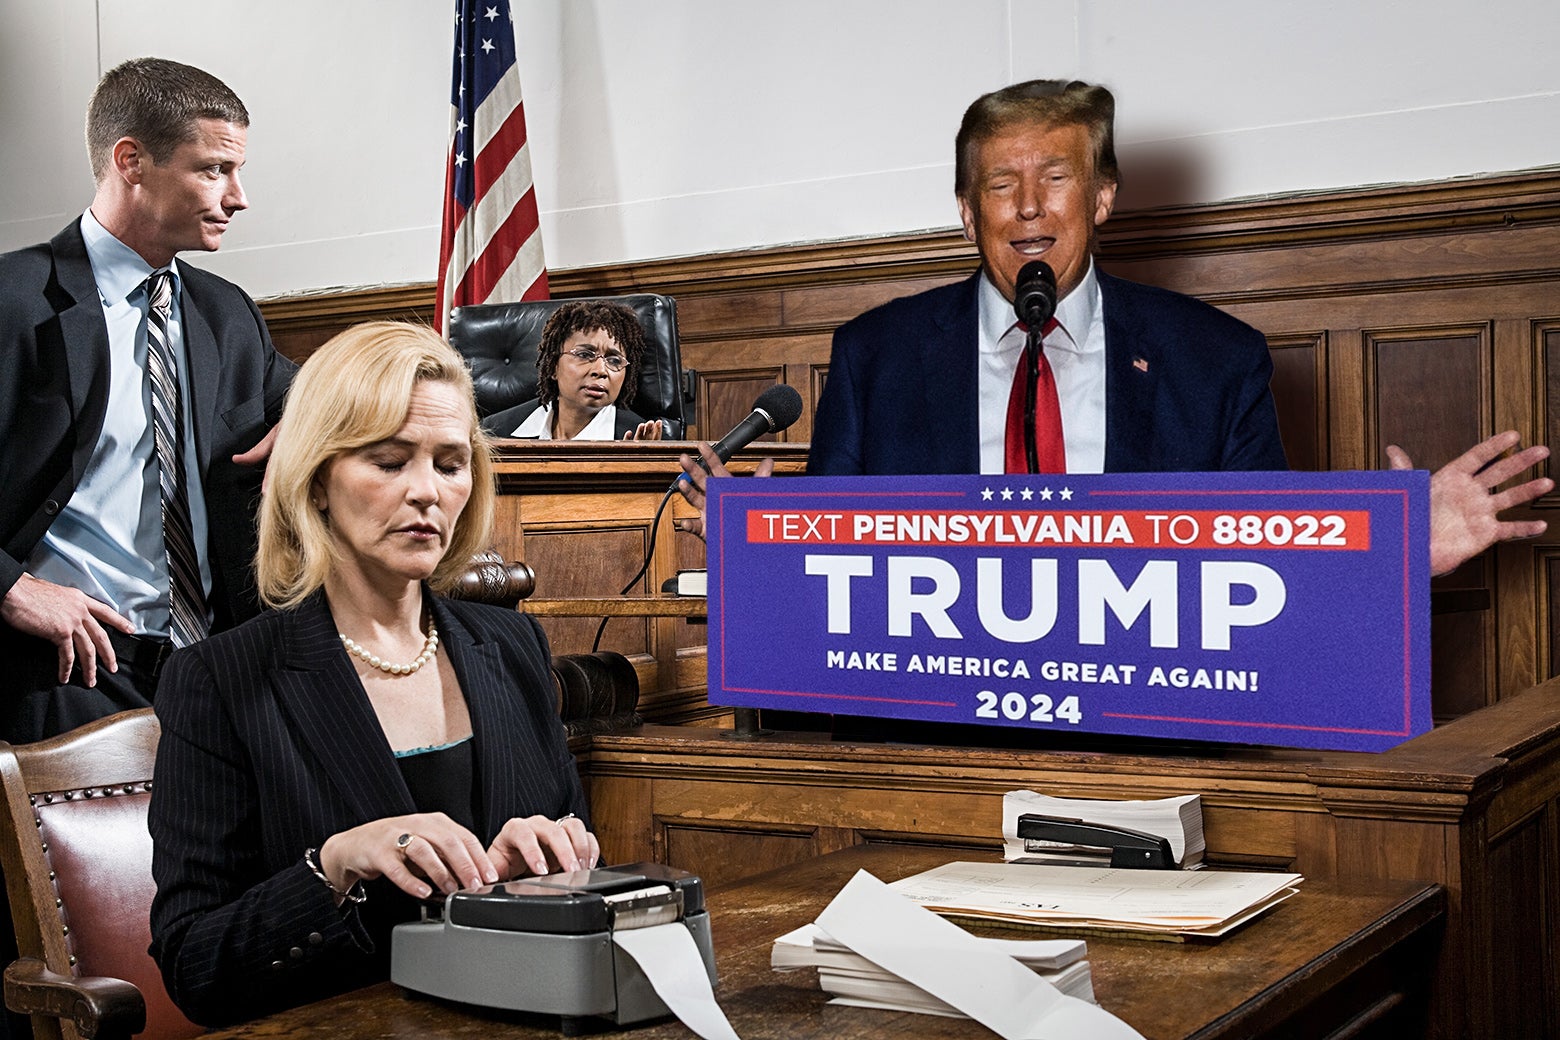 A photo illustration of a cardboard cutout of Trump at the witness stand in a courtroom, with a judge and an attorney looking on and a stenographer taking notes on a typewriter.